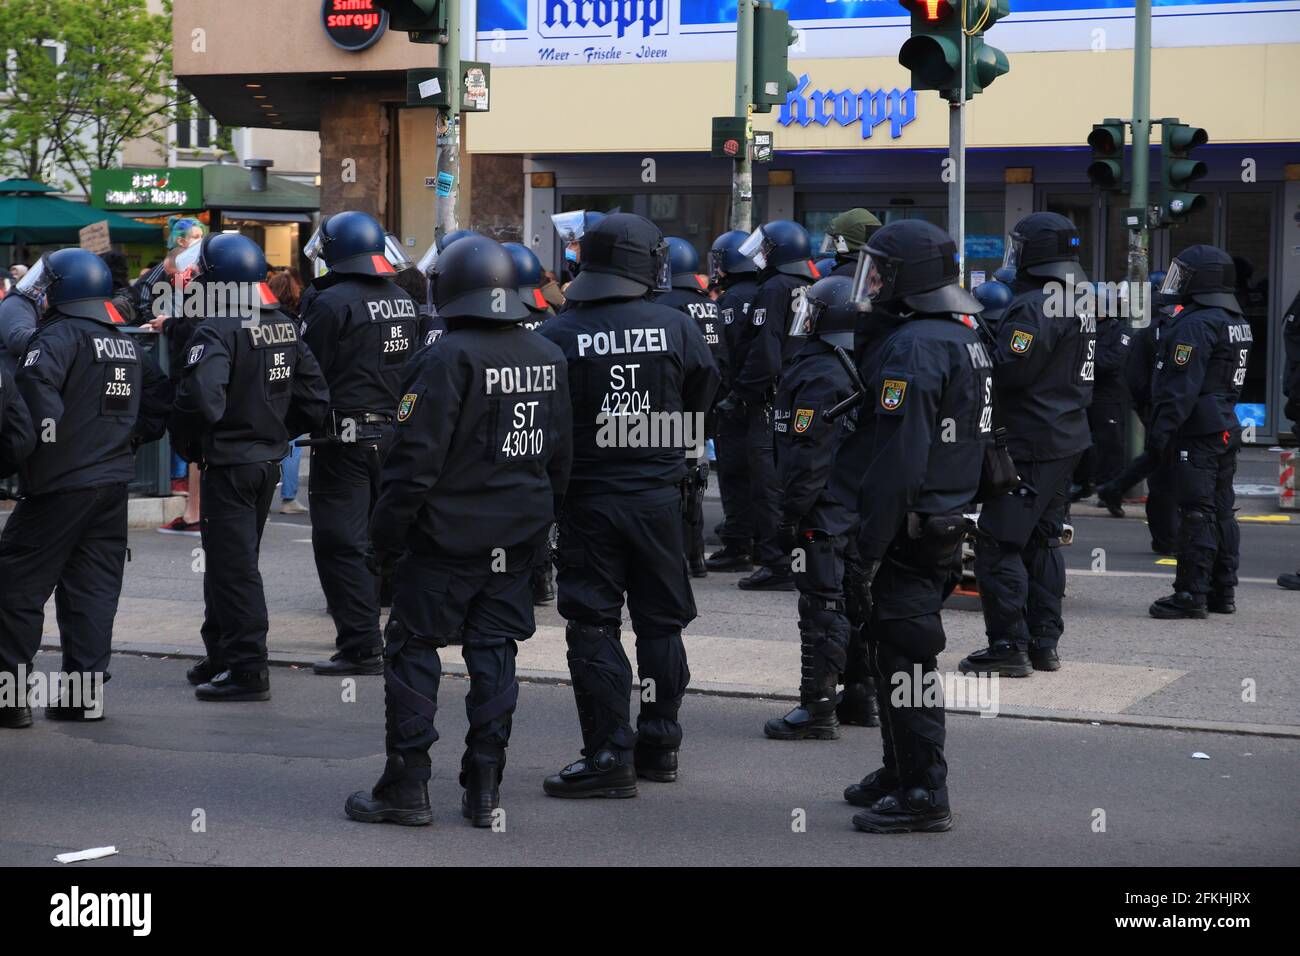 Berlin, Germany - May 01, 2021: Police team on street at myfest celebration on mayday. May Day in Berlin Neukölln refers to the street festivals and d Stock Photo